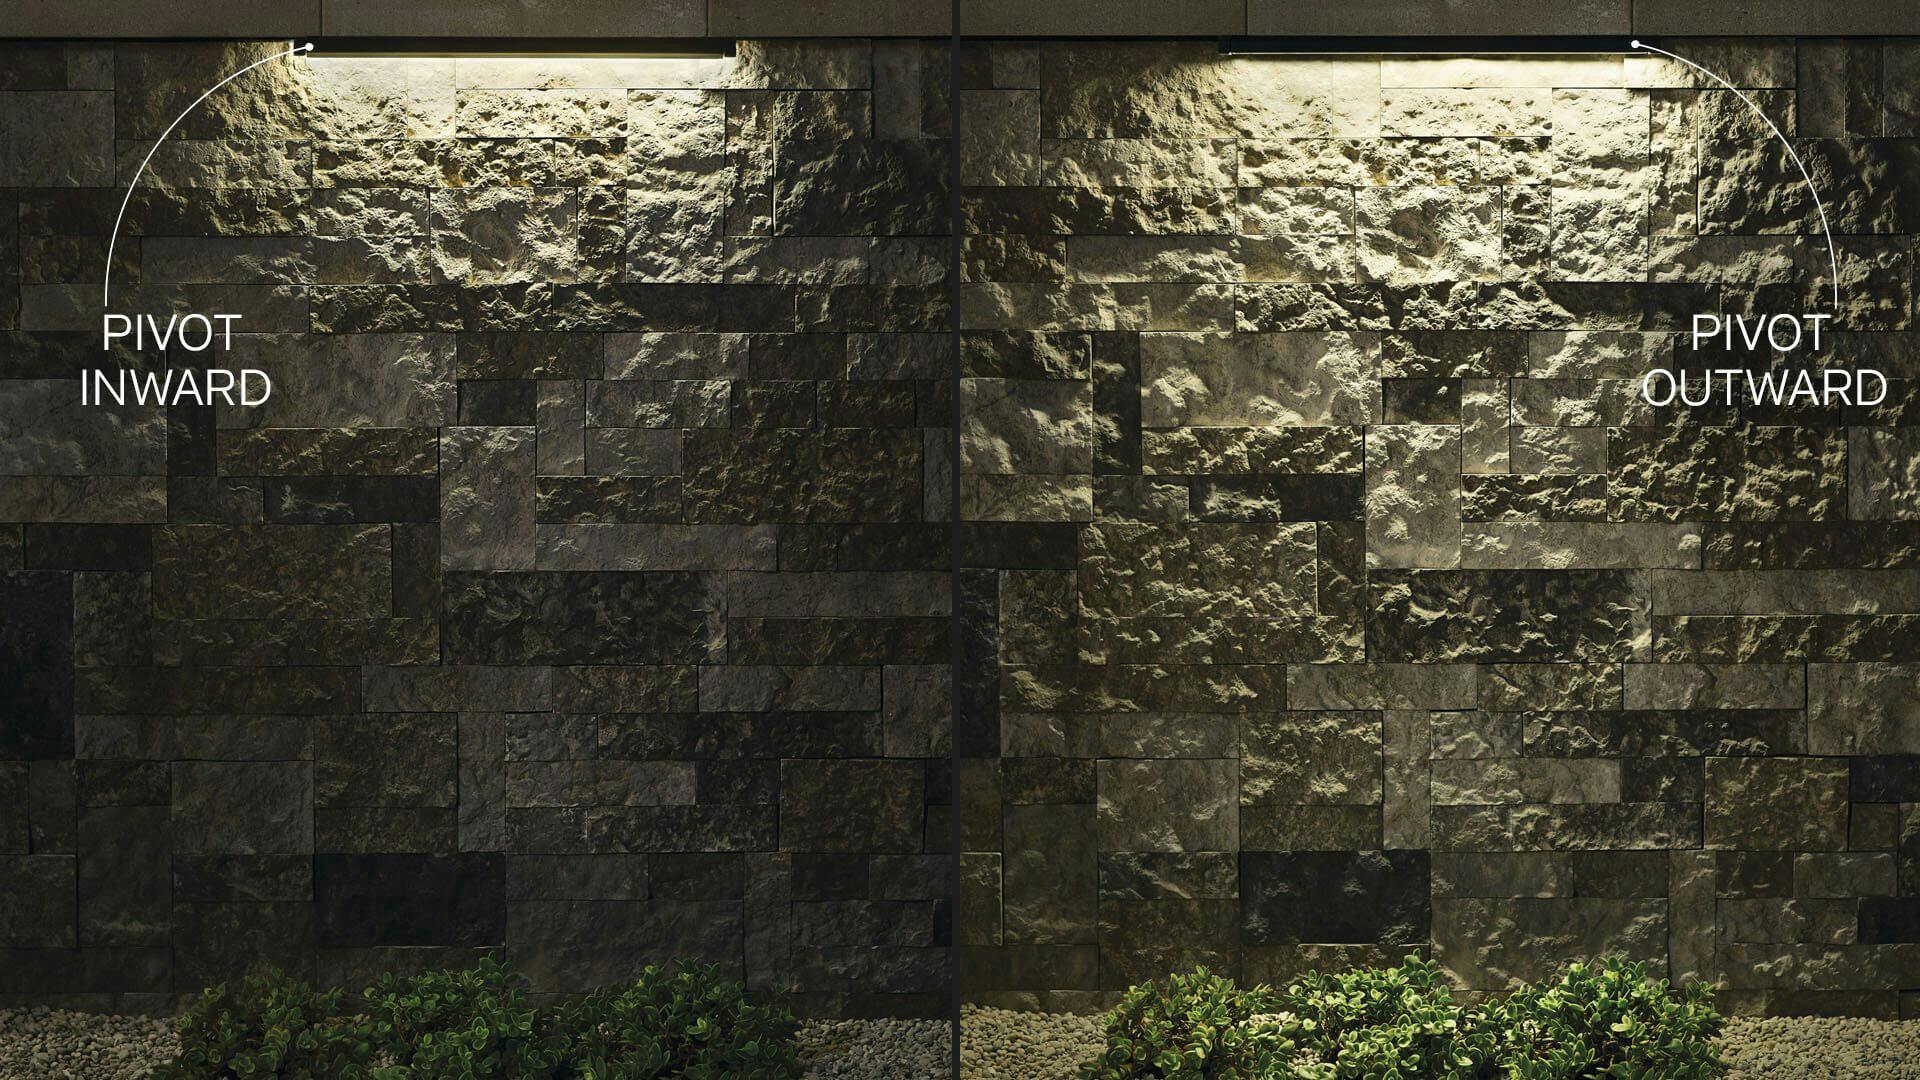 Side-by-side image of a stone wall with a downlight demonstrating the difference between when the light is pivoted inward versus outward